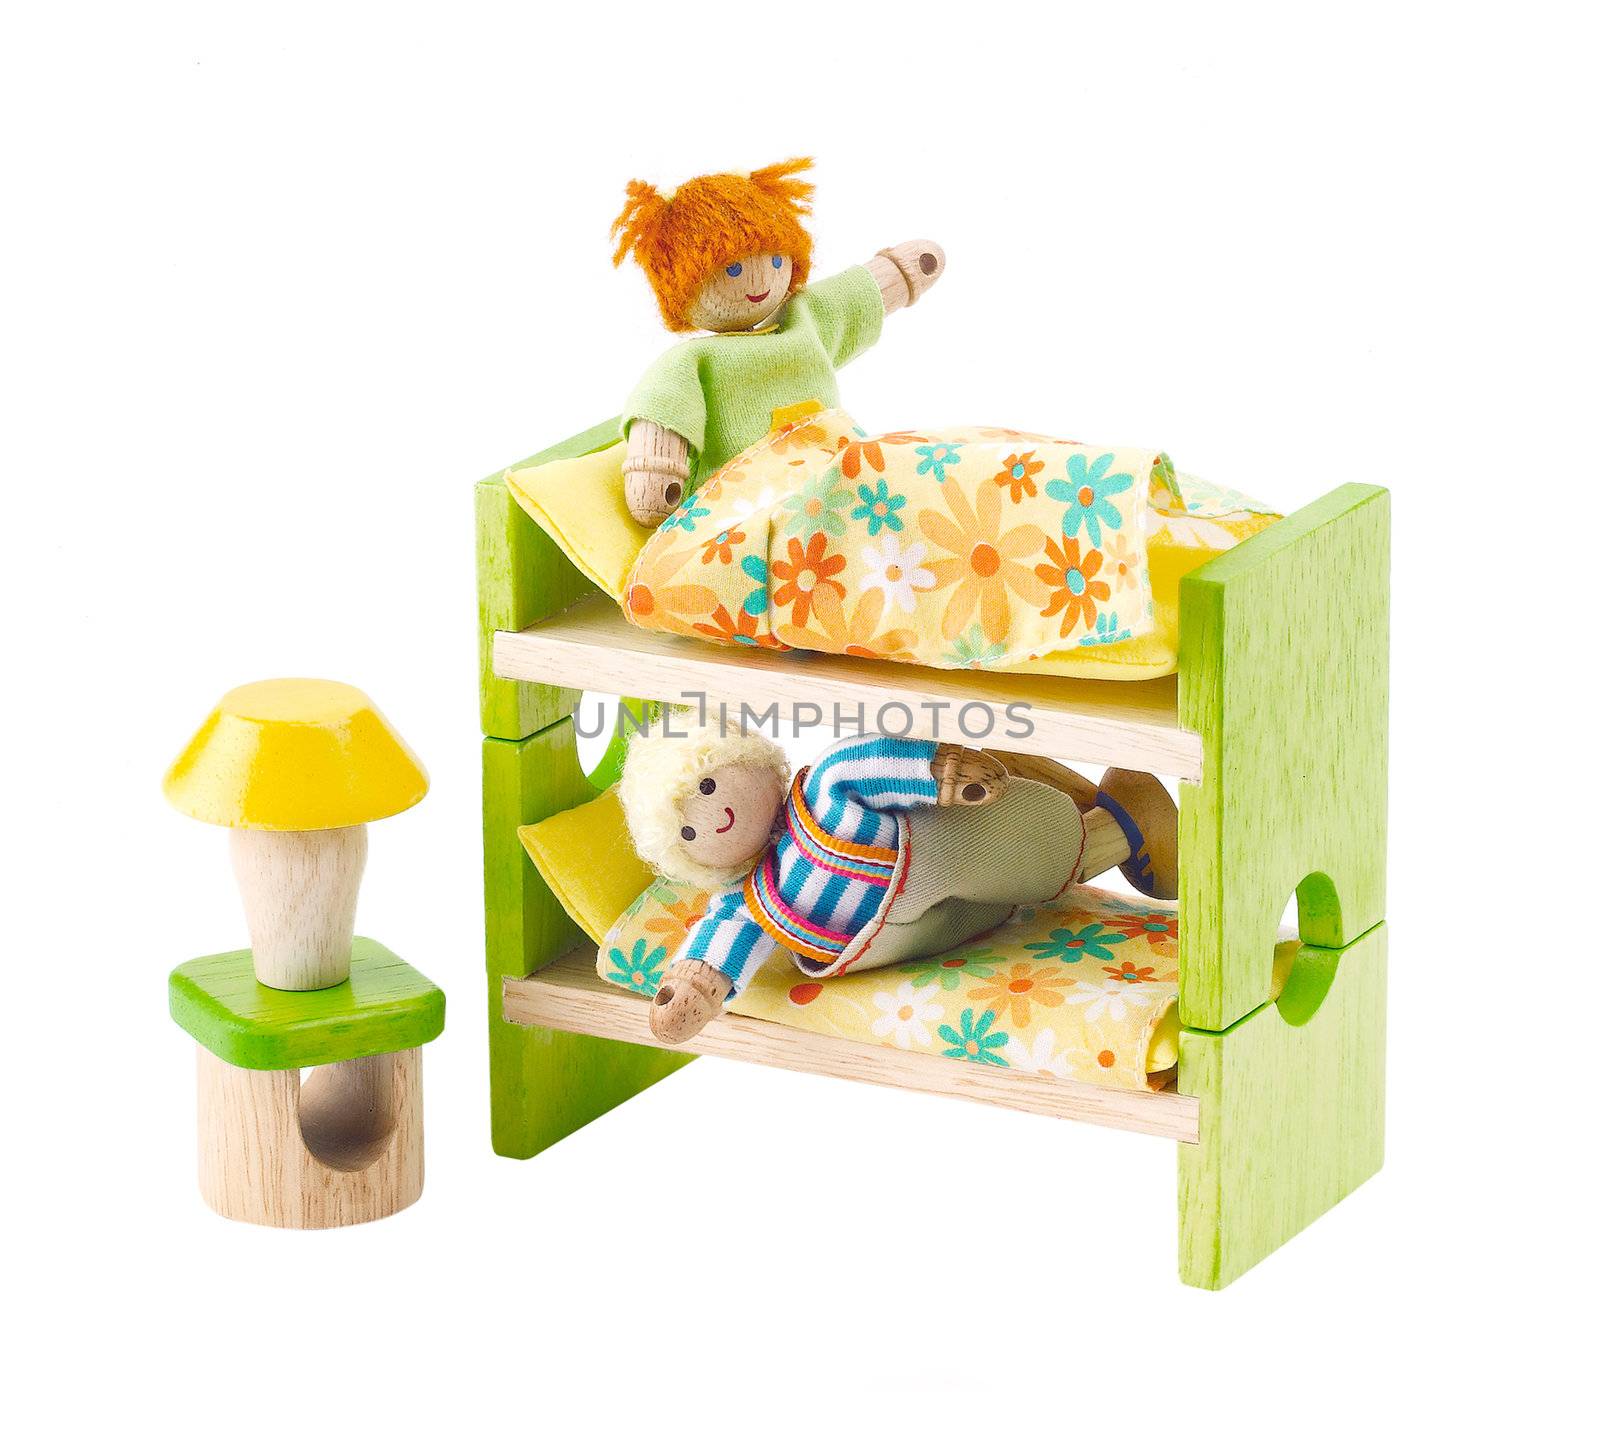 Wooden bed toy furniture for children learning to decorates bedroom